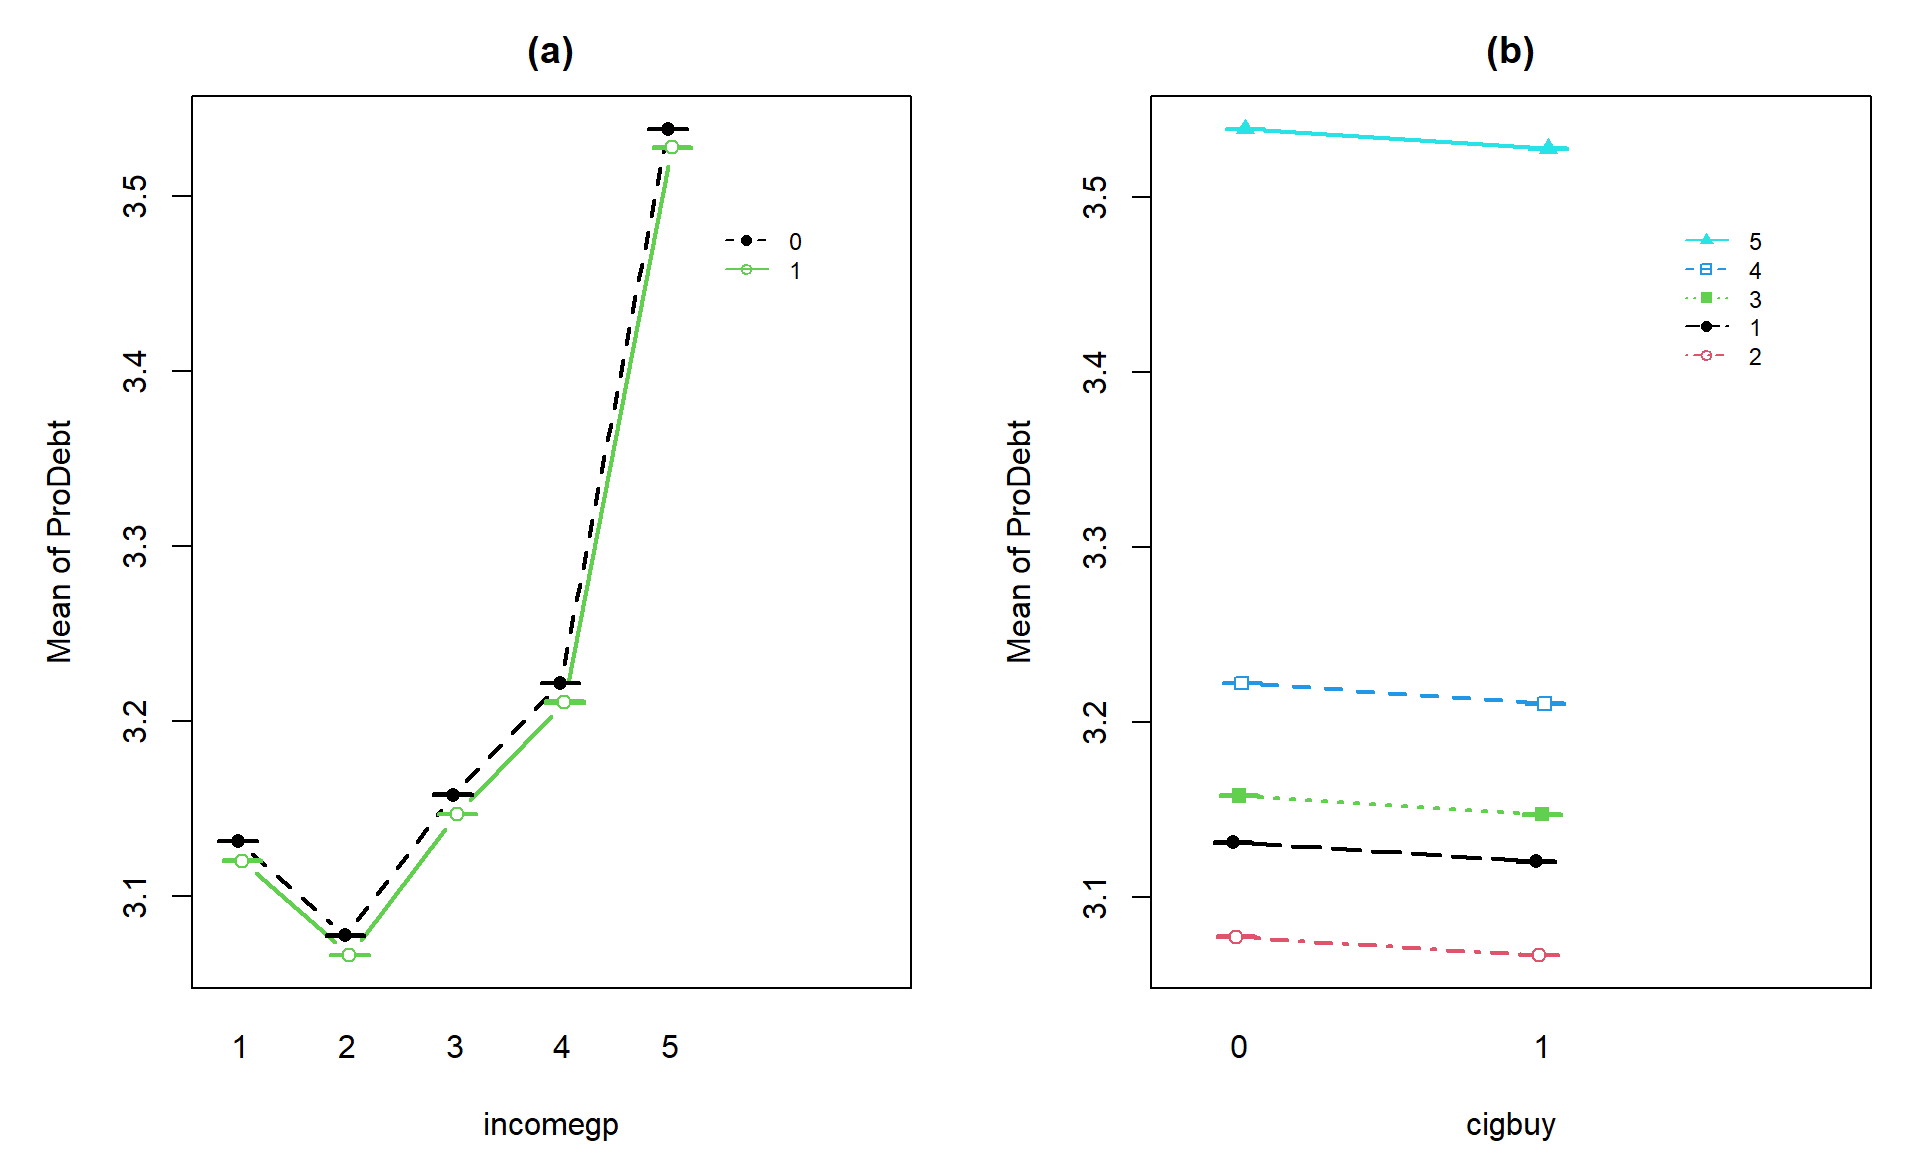 Illustration of the results from Table 4.3 showing the combined impacts of the components of the additive model for prodebt. Panel (a) uses income groups on the x-axis and different lines for cigarette buyers (1) or not (0). Panel (b) displays the different income groups as lines with the cigarette buying status on the x-axis.